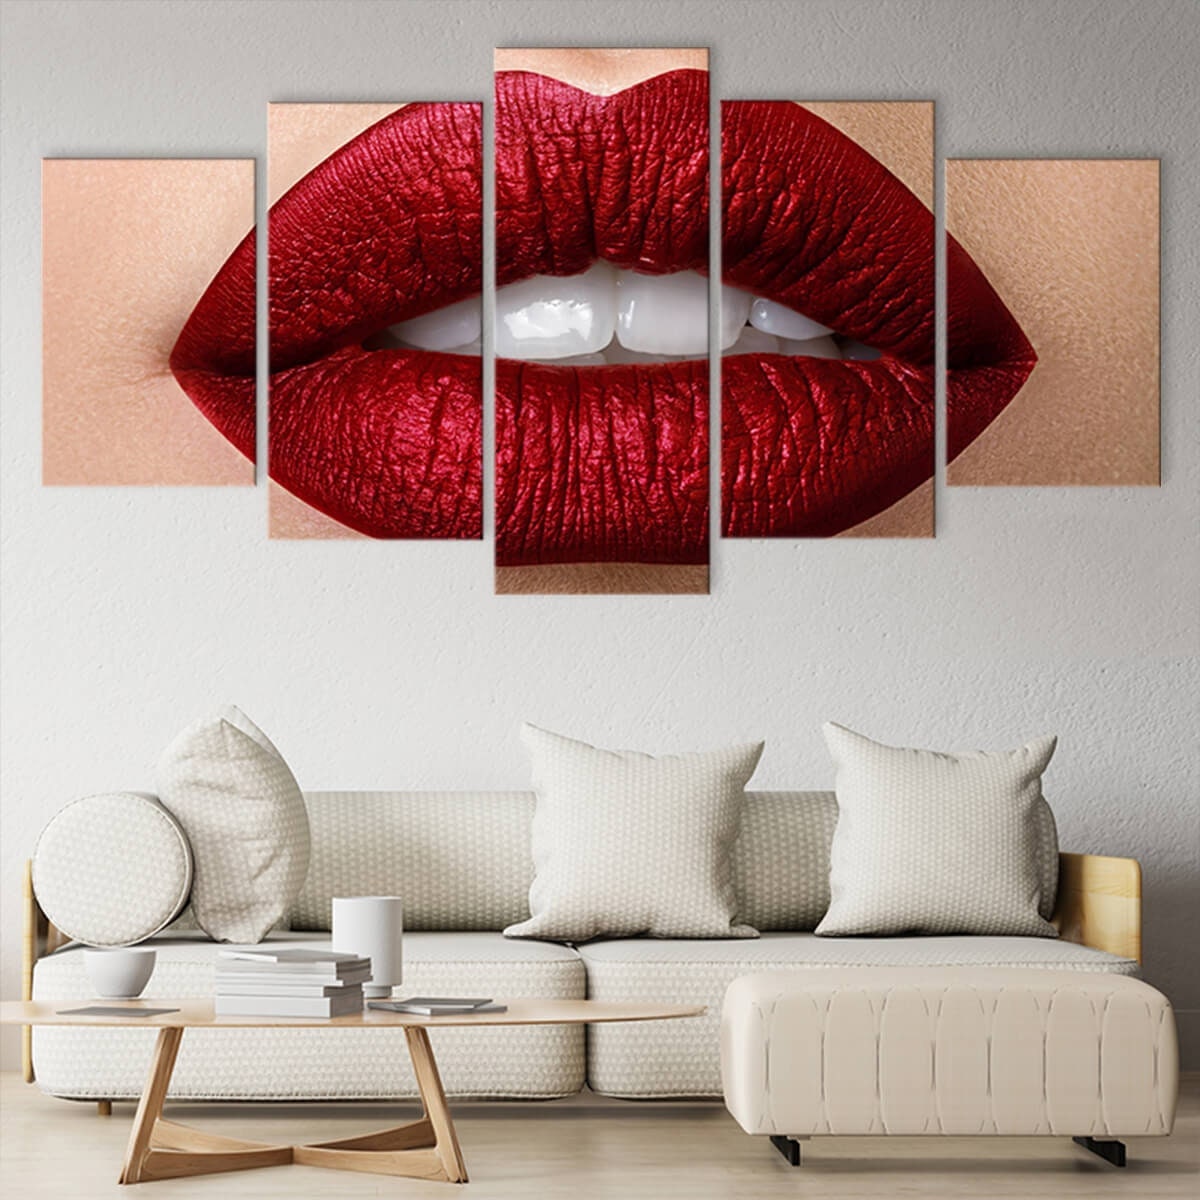 Red Lips Canvas Wall Art - Vibrant Home Decor for a Bold Statement